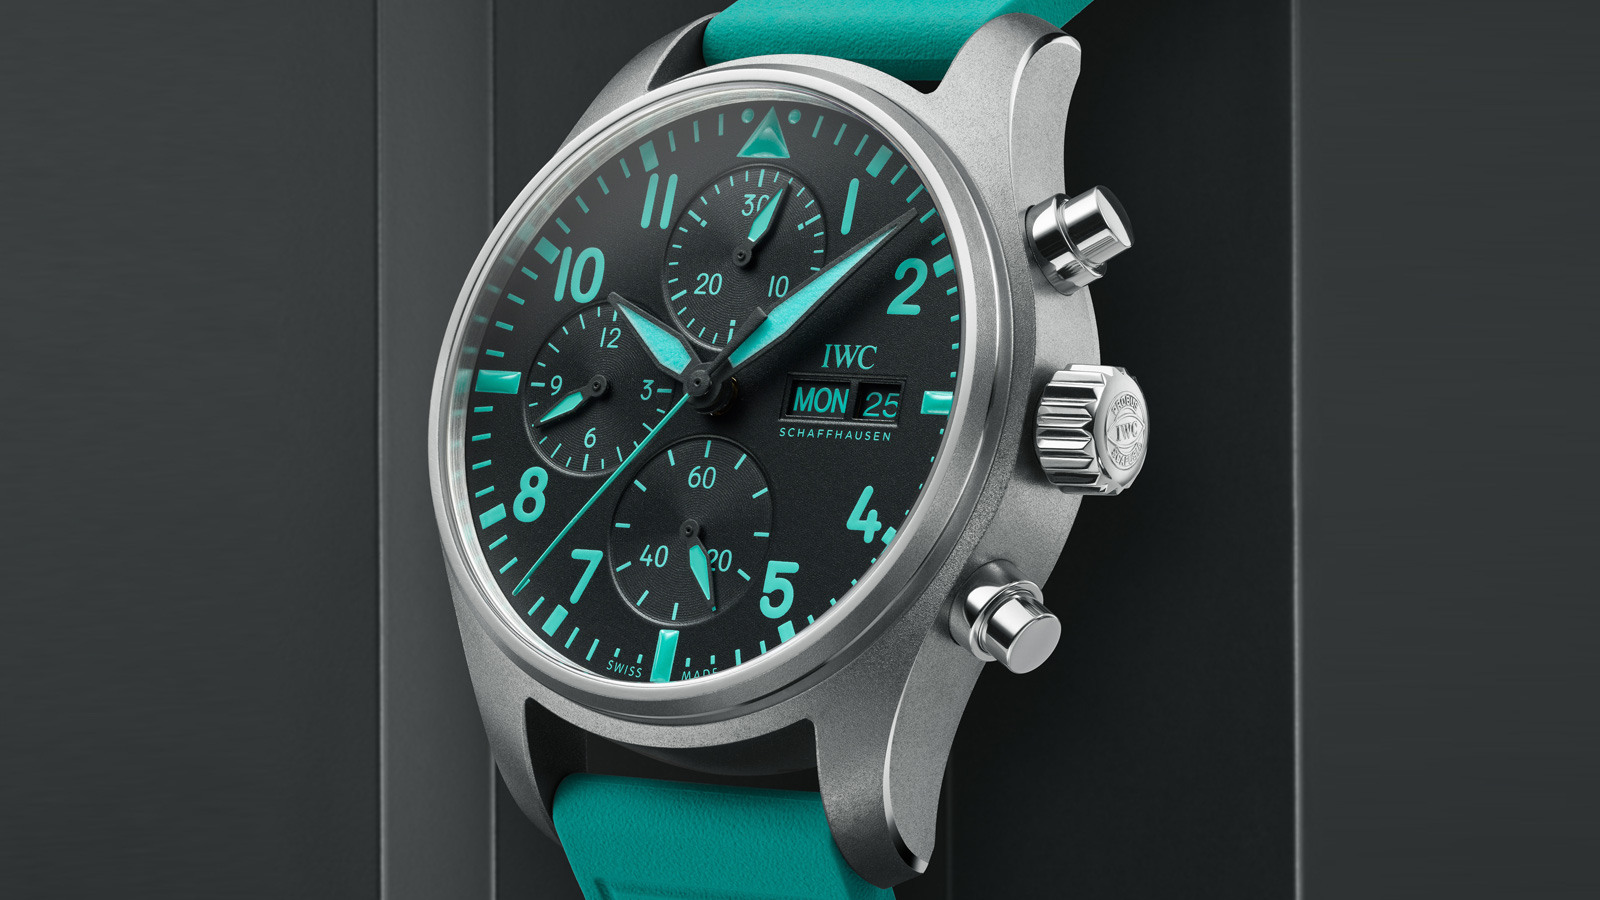 IWC and Mercedes Drop A New F1 Pilots Watch In Time For The Miami Grand Prix